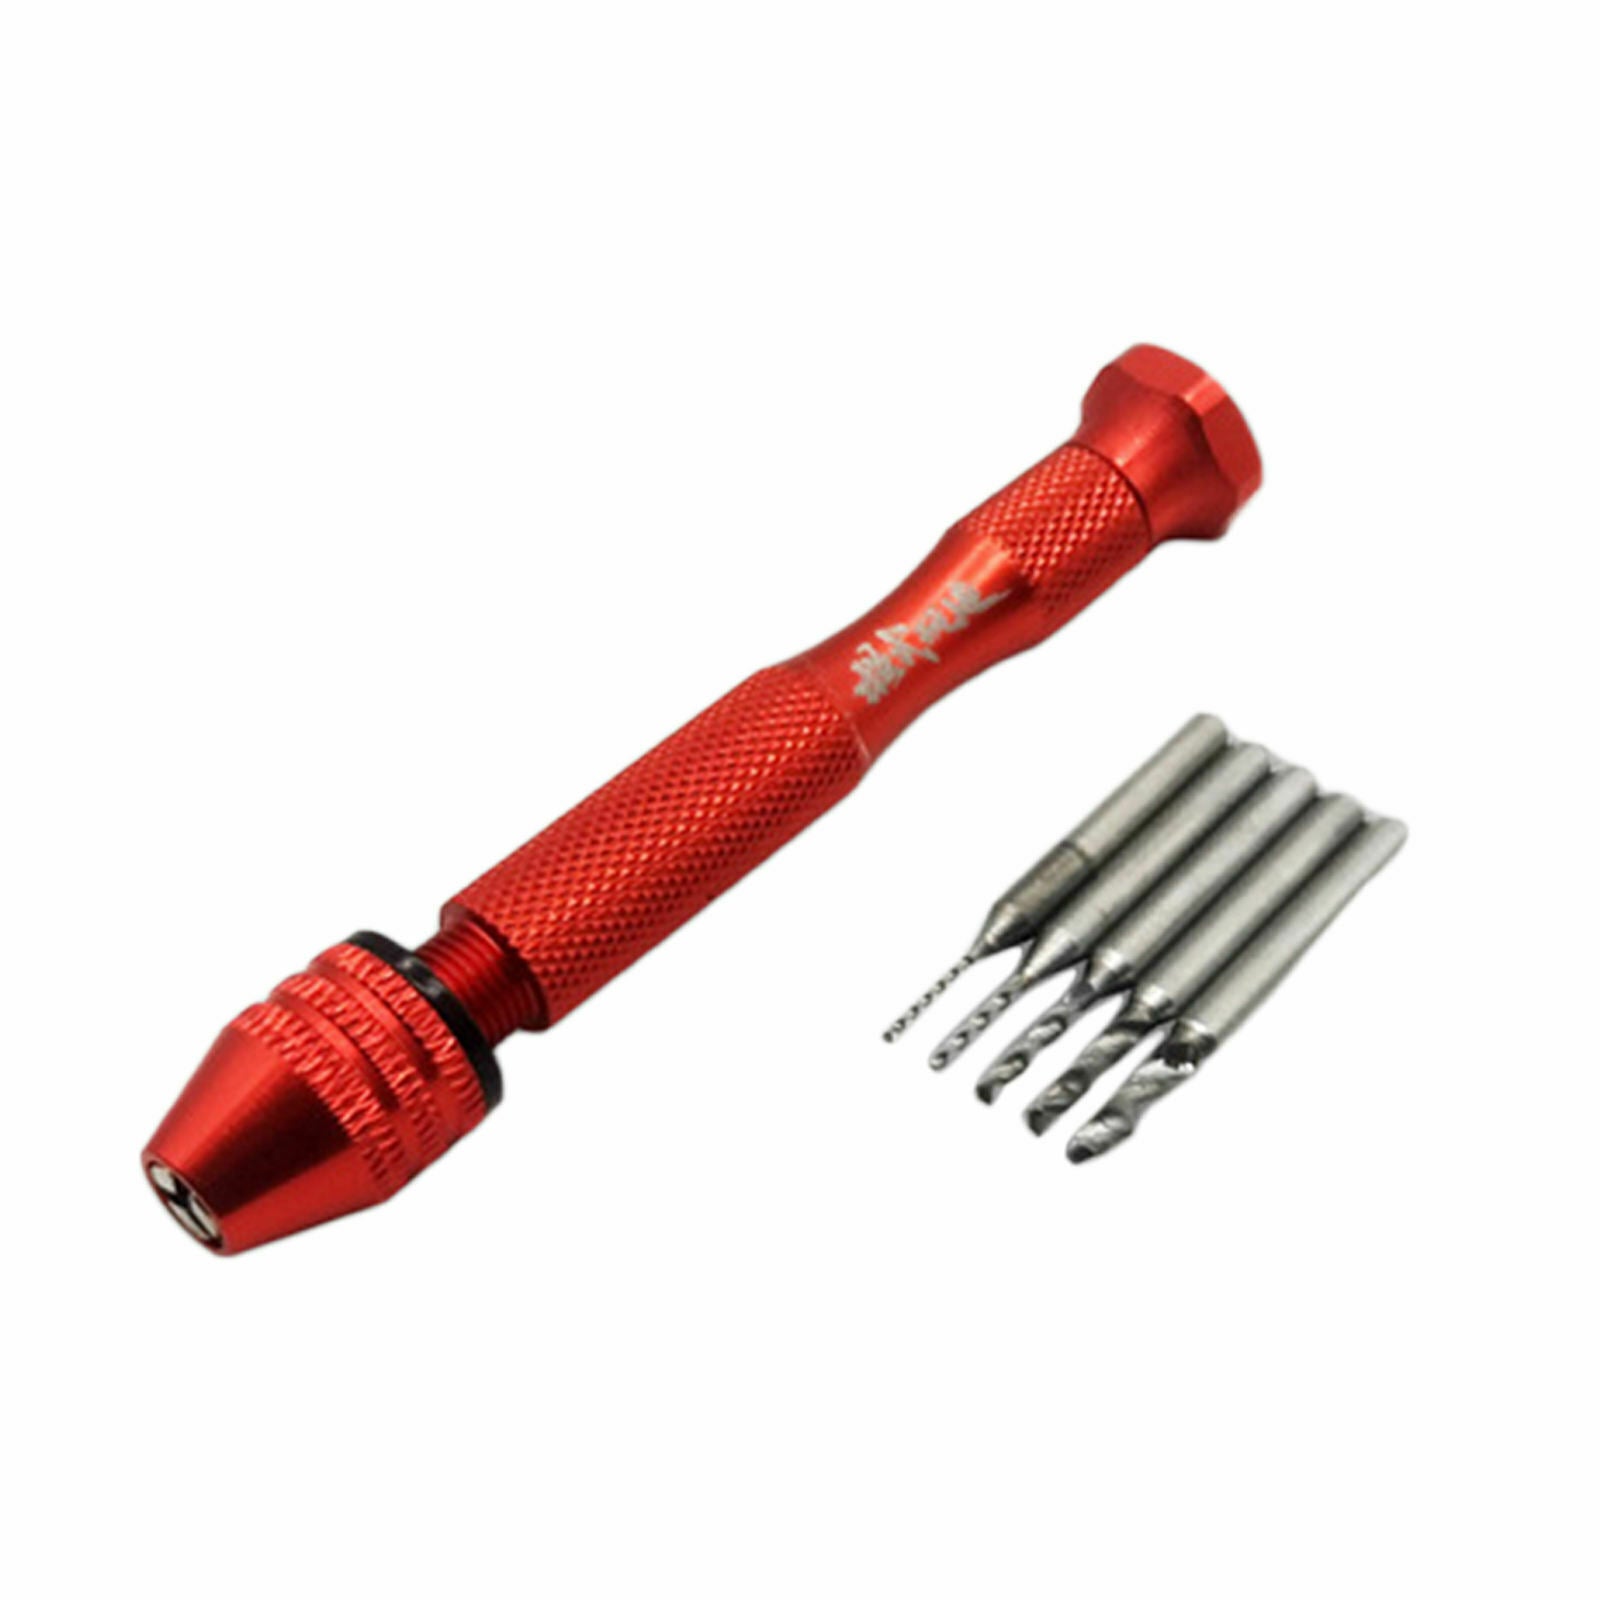 Precision Hand Drill Set Twist for Gundam Hobby Tool Carving Manual Work